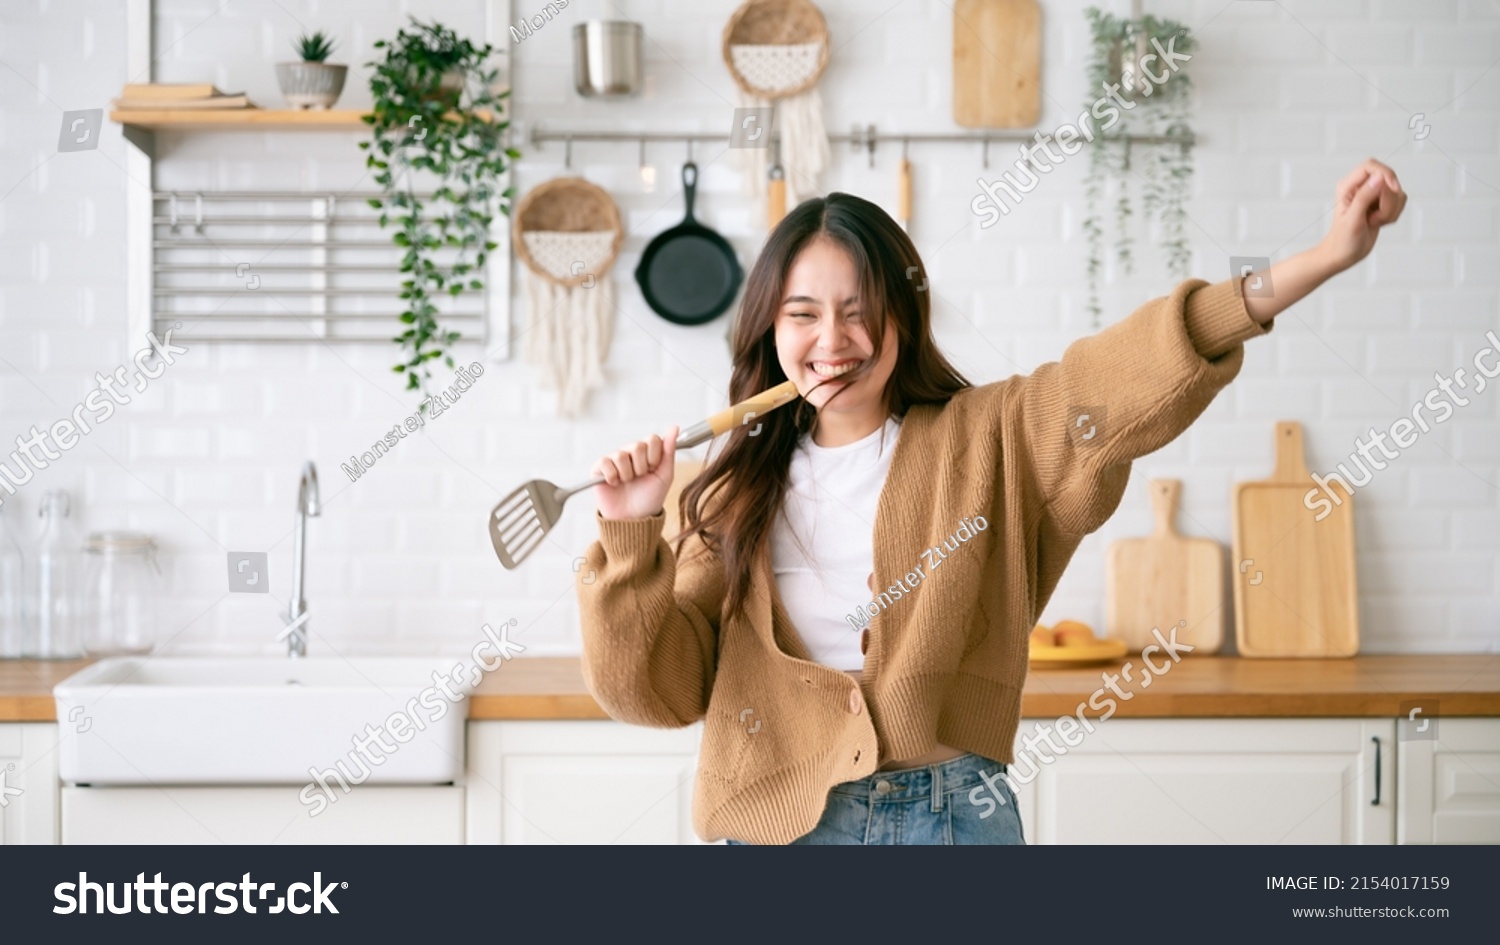 Asian young woman dancing in kitchen room. She happy and relaxing at free time on weekend #2154017159